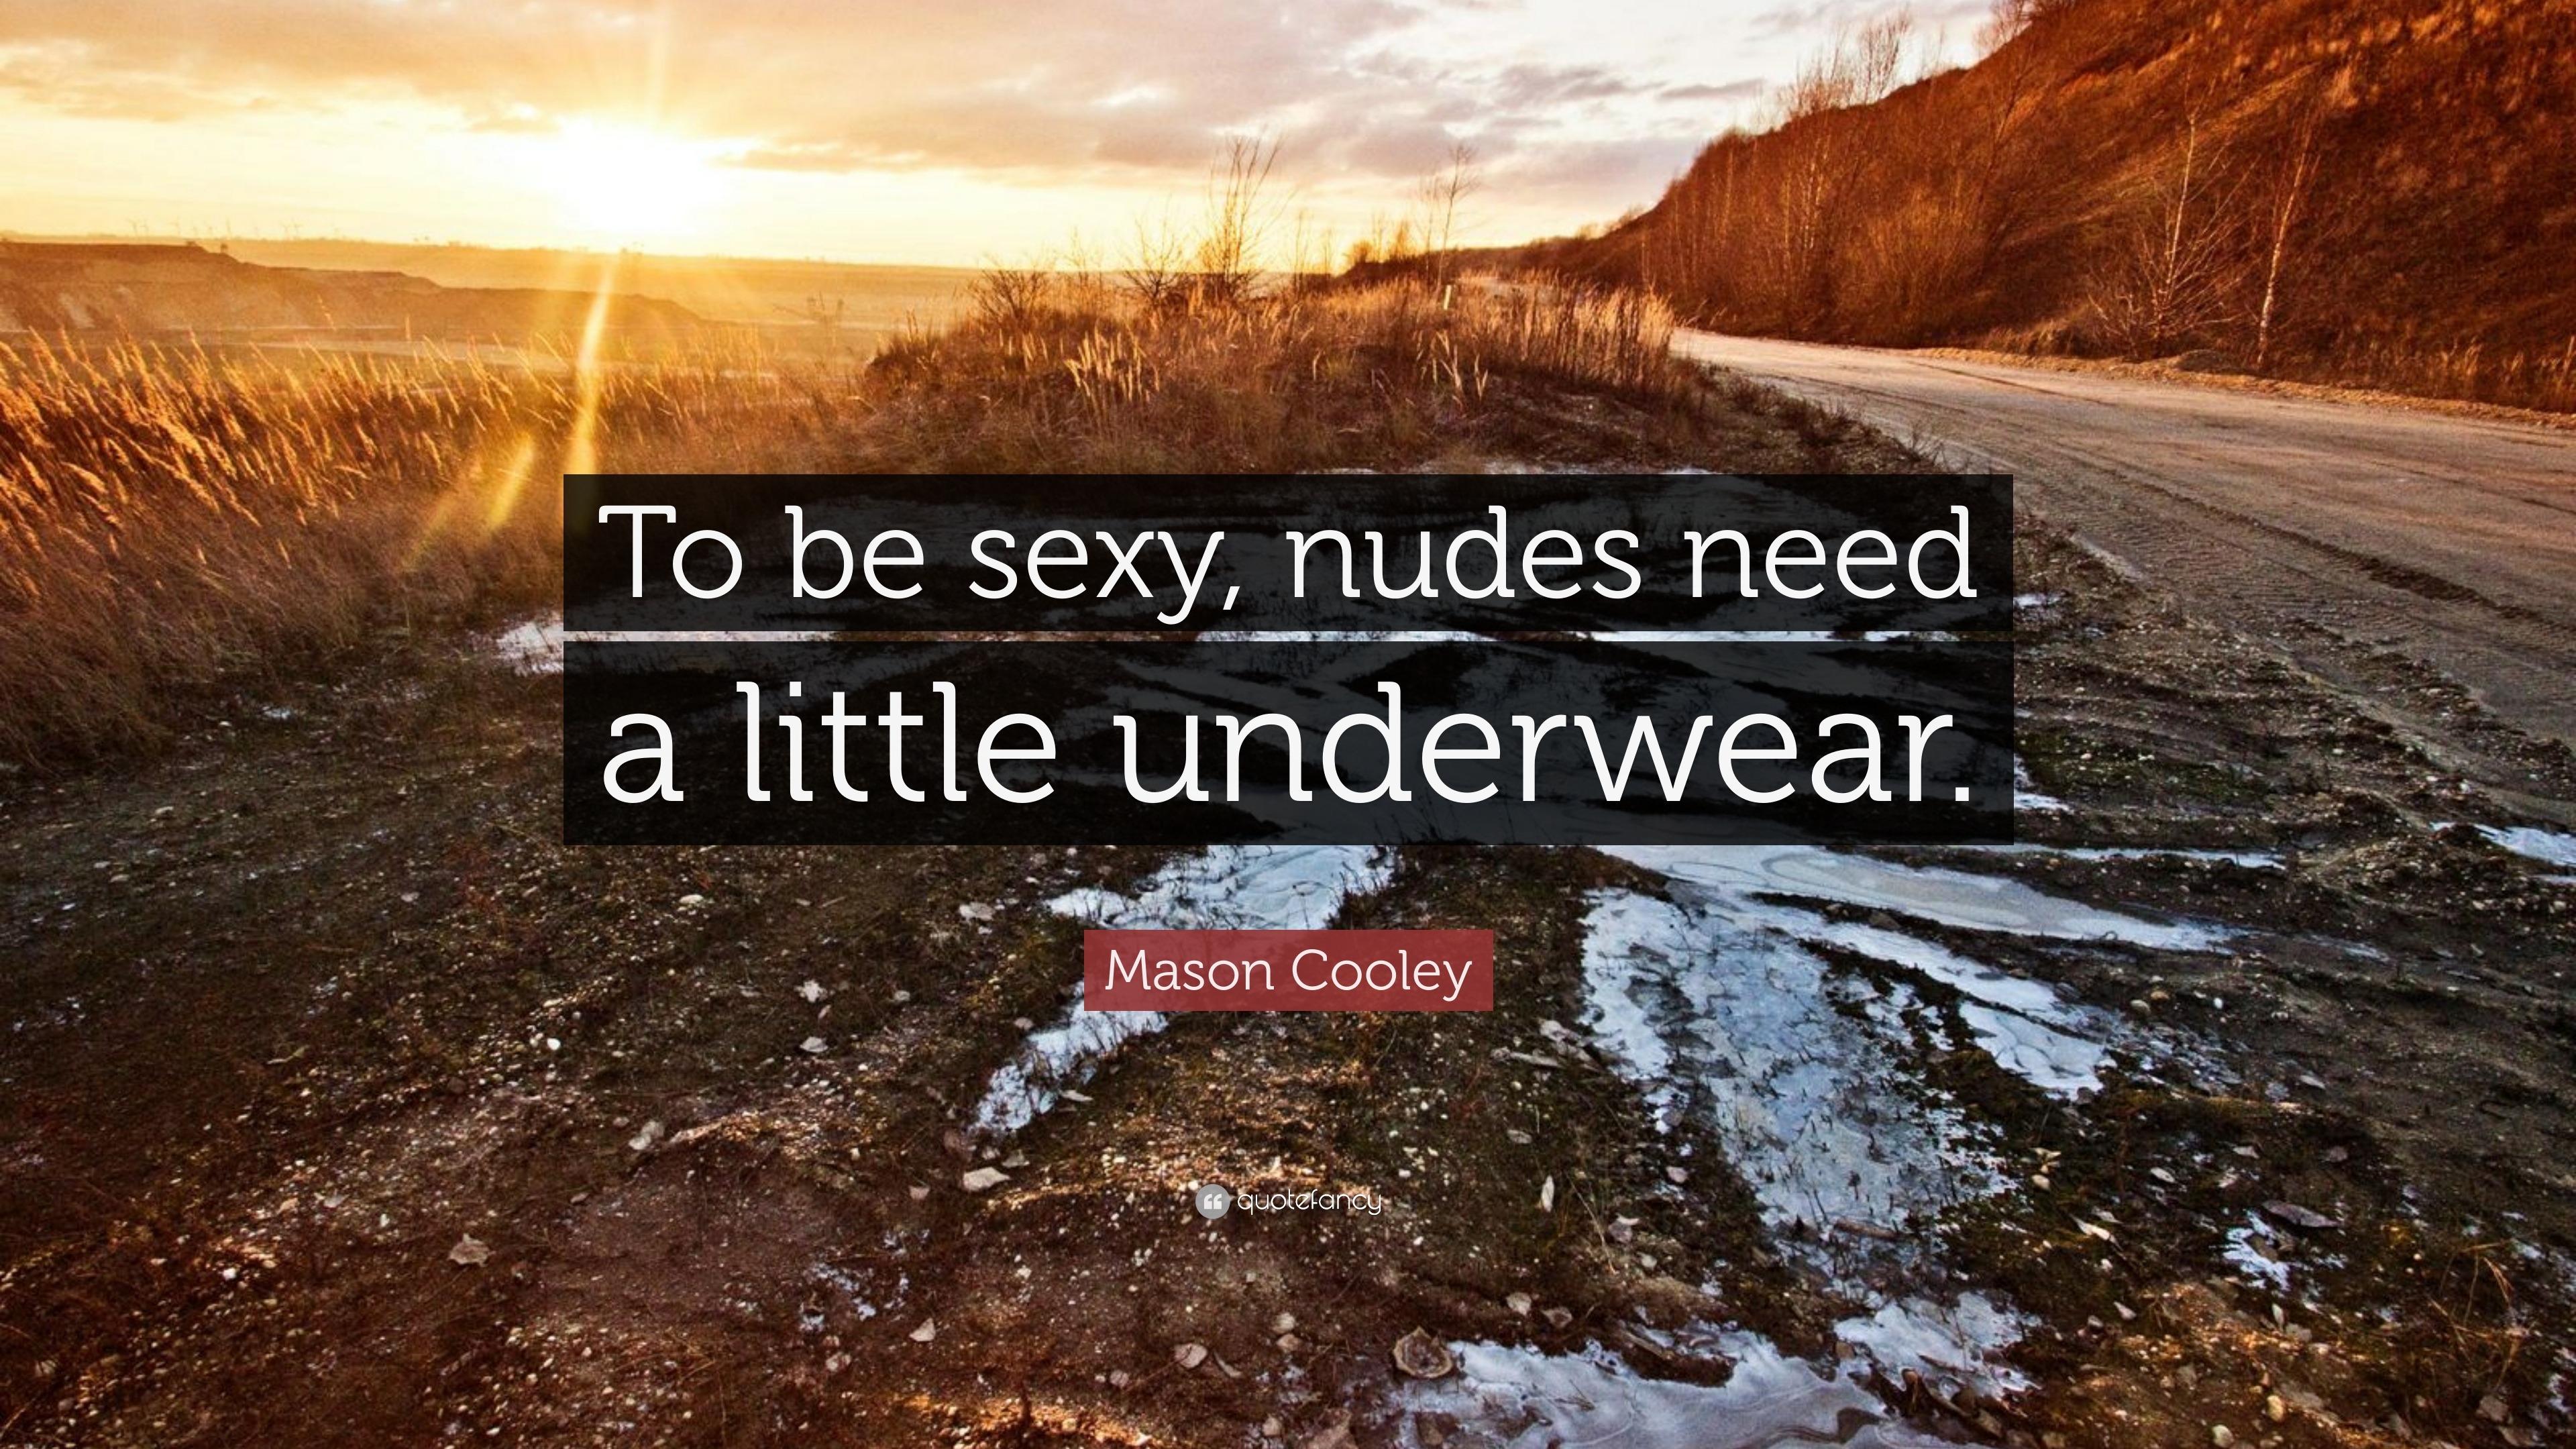 https://quotefancy.com/media/wallpaper/3840x2160/505784-Mason-Cooley-Quote-To-be-sexy-nudes-need-a-little-underwear.jpg